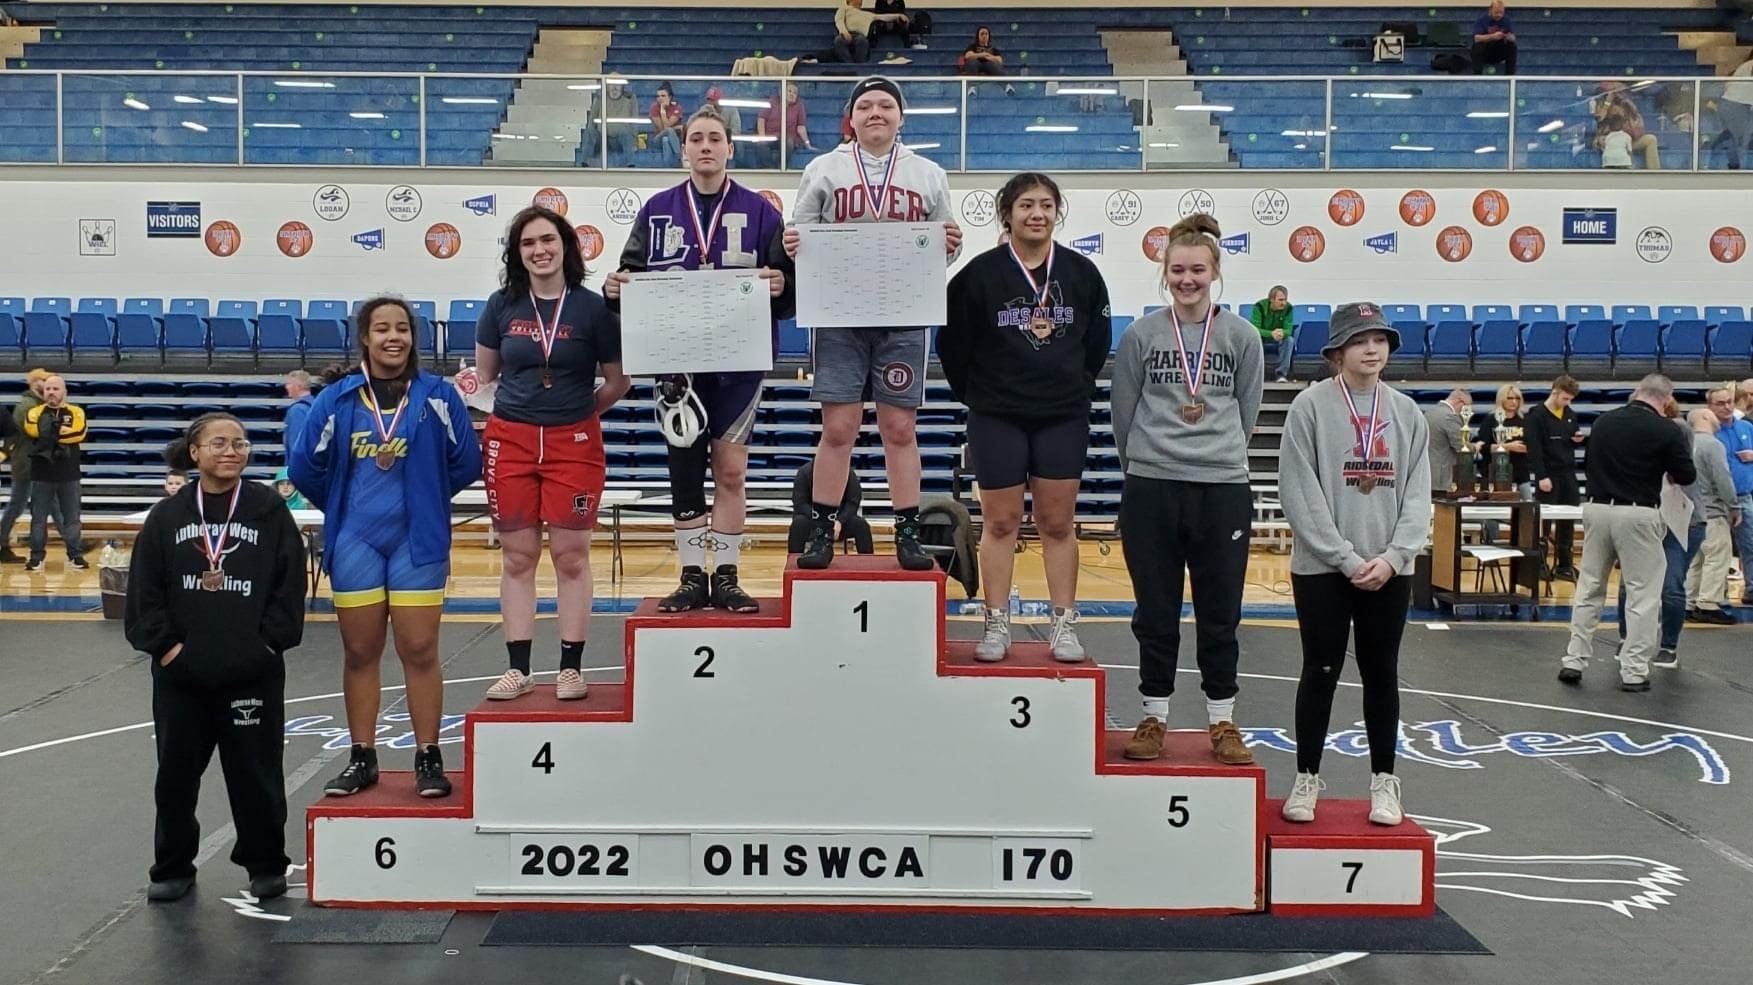 Ademar Ramirez places 3rd at the Girls Wrestling State Championships